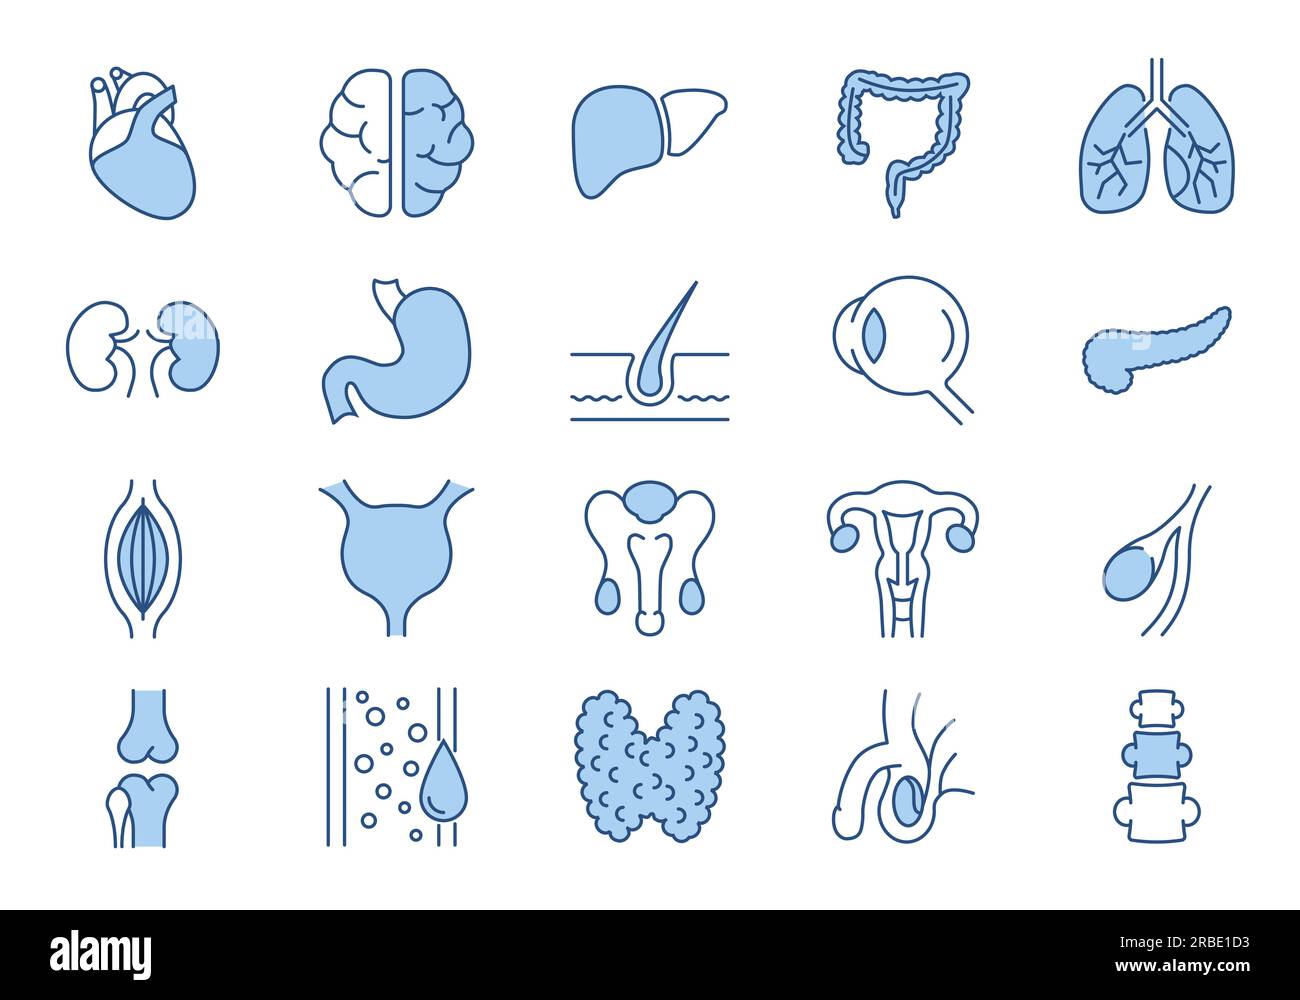 Internal Organs Related Vector Icons Set. Contains such Icons as Reproductive System, Brain, Heart, Blood Vessel, Lungs, Liver, Eye, Pancreas, Urinary Stock Vector